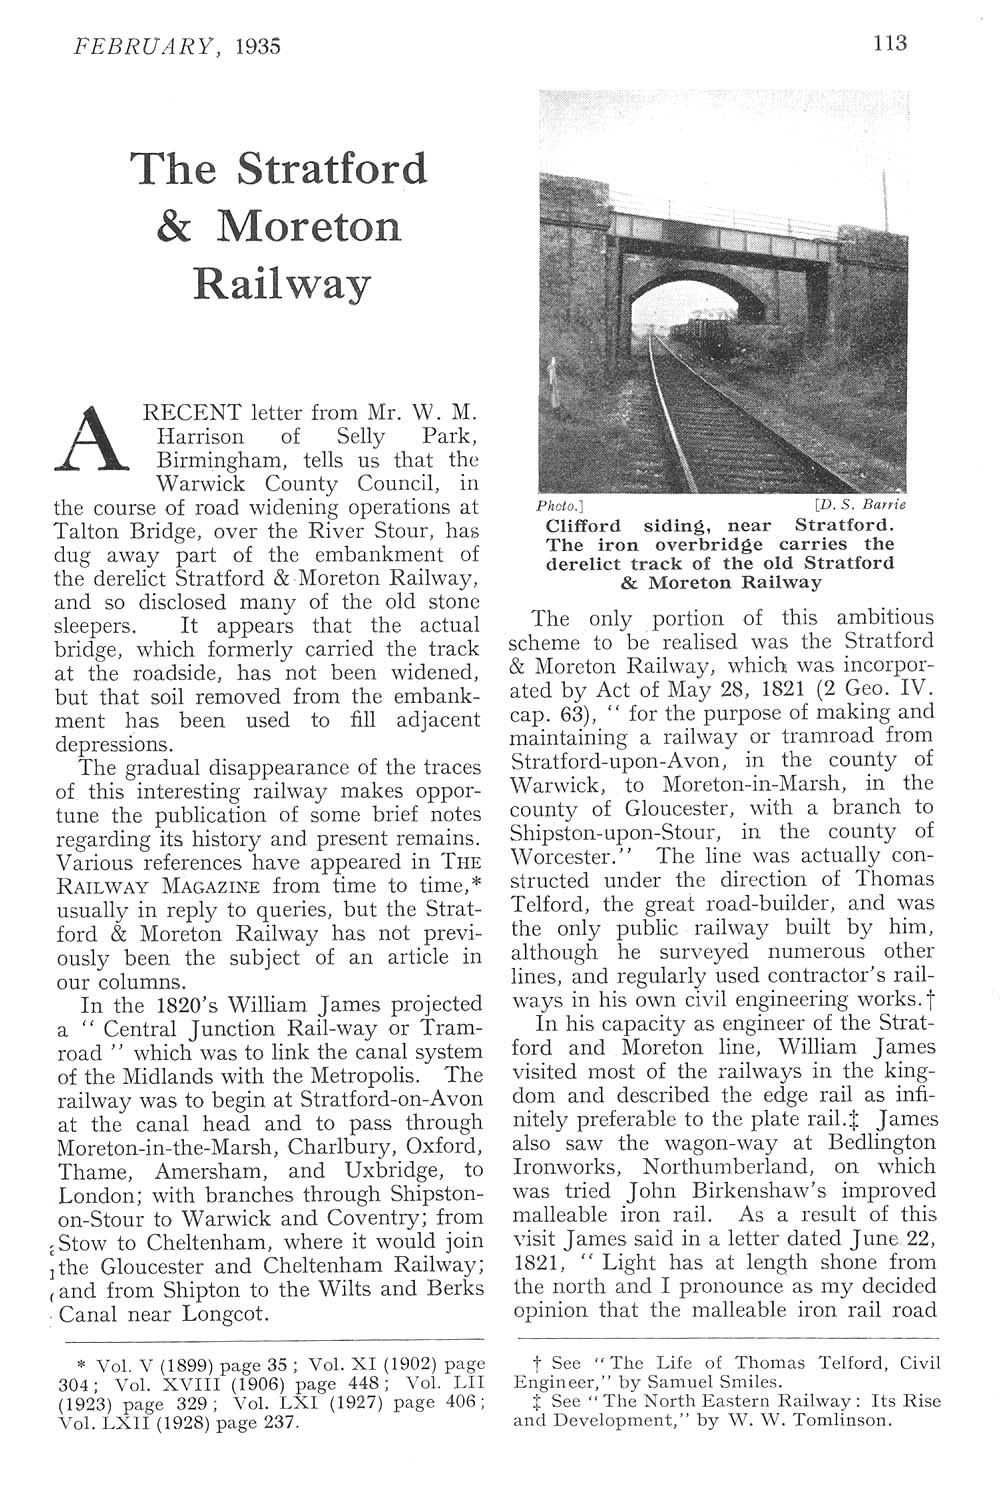 GWR Appendix to the March 1950 STT detailing the local instructions as to the occupation of the Shipston-on-Stour Branch